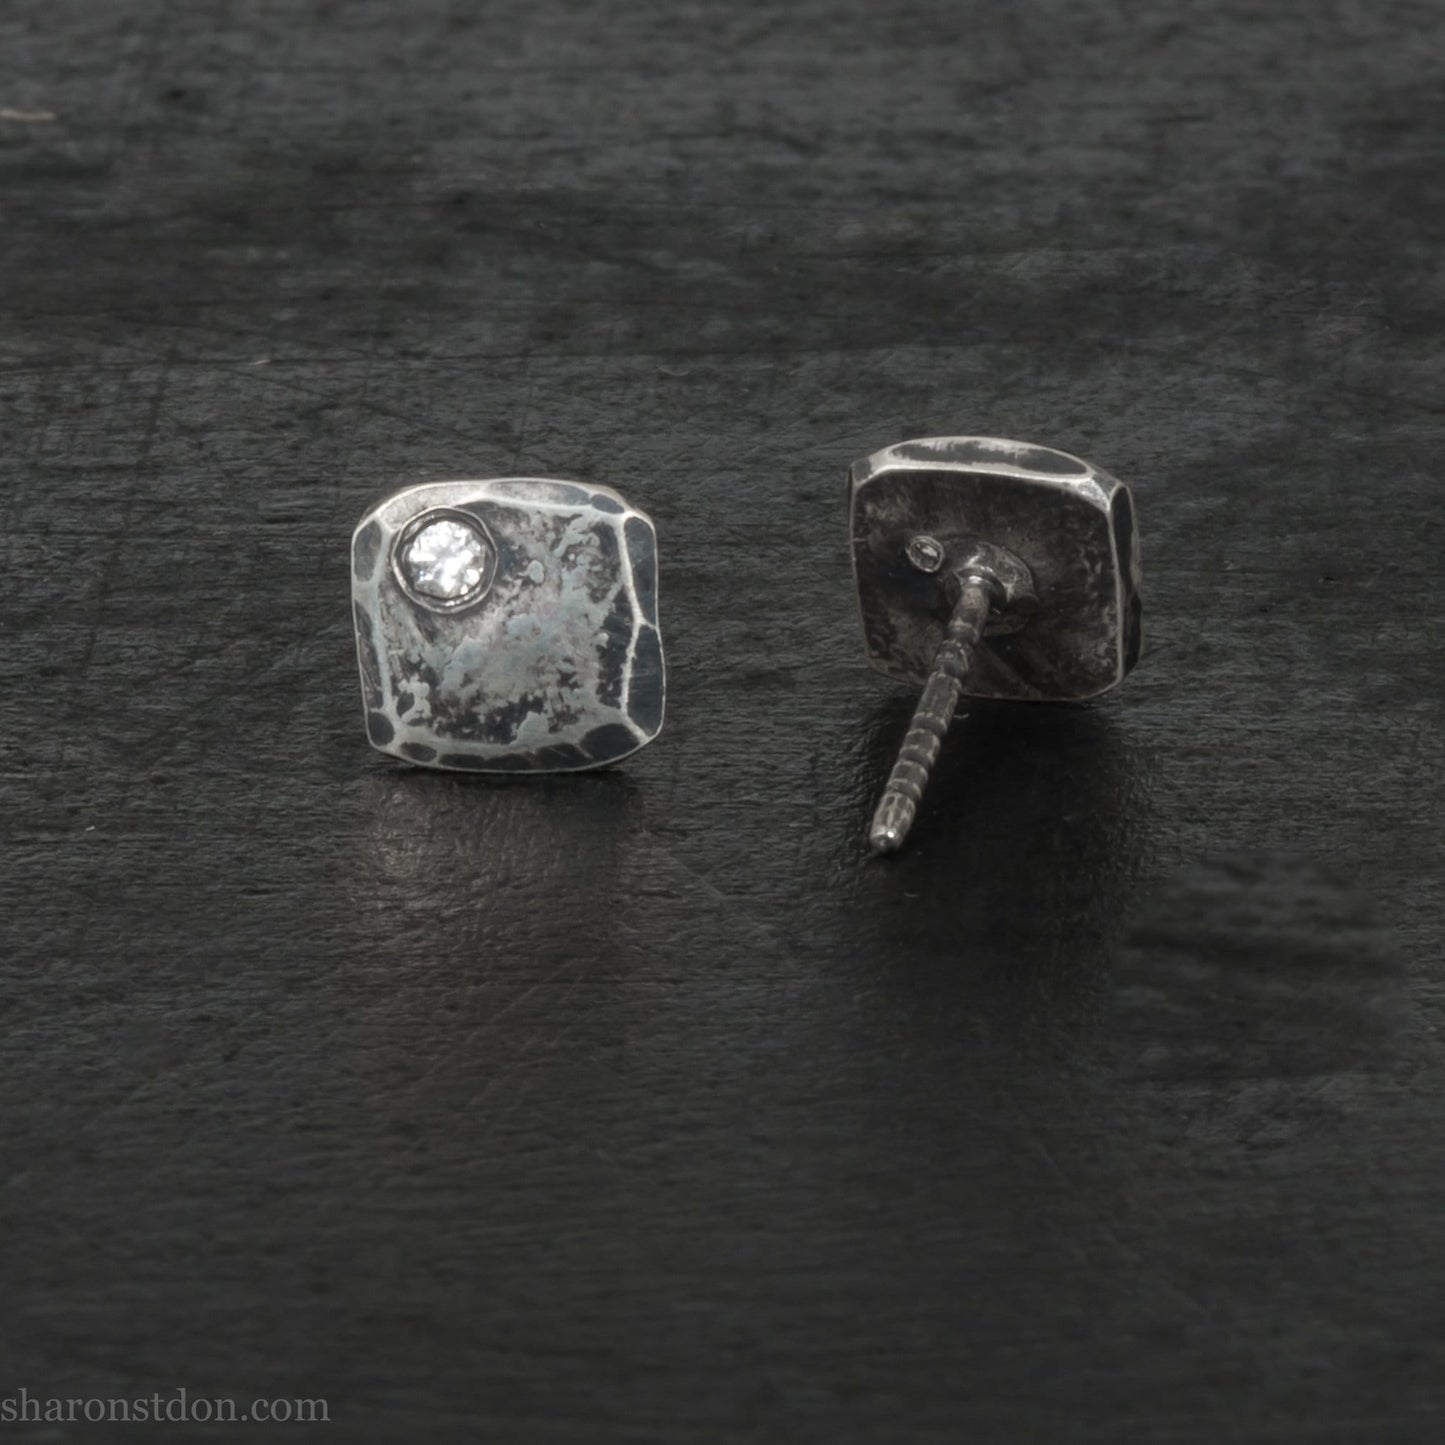 7mm square, handmade 925 sterling silver stud earrings with Canadamark brand Canadian diamond in the corner. Dark, antique finish, Handmade by Sharon SaintDon in North America.